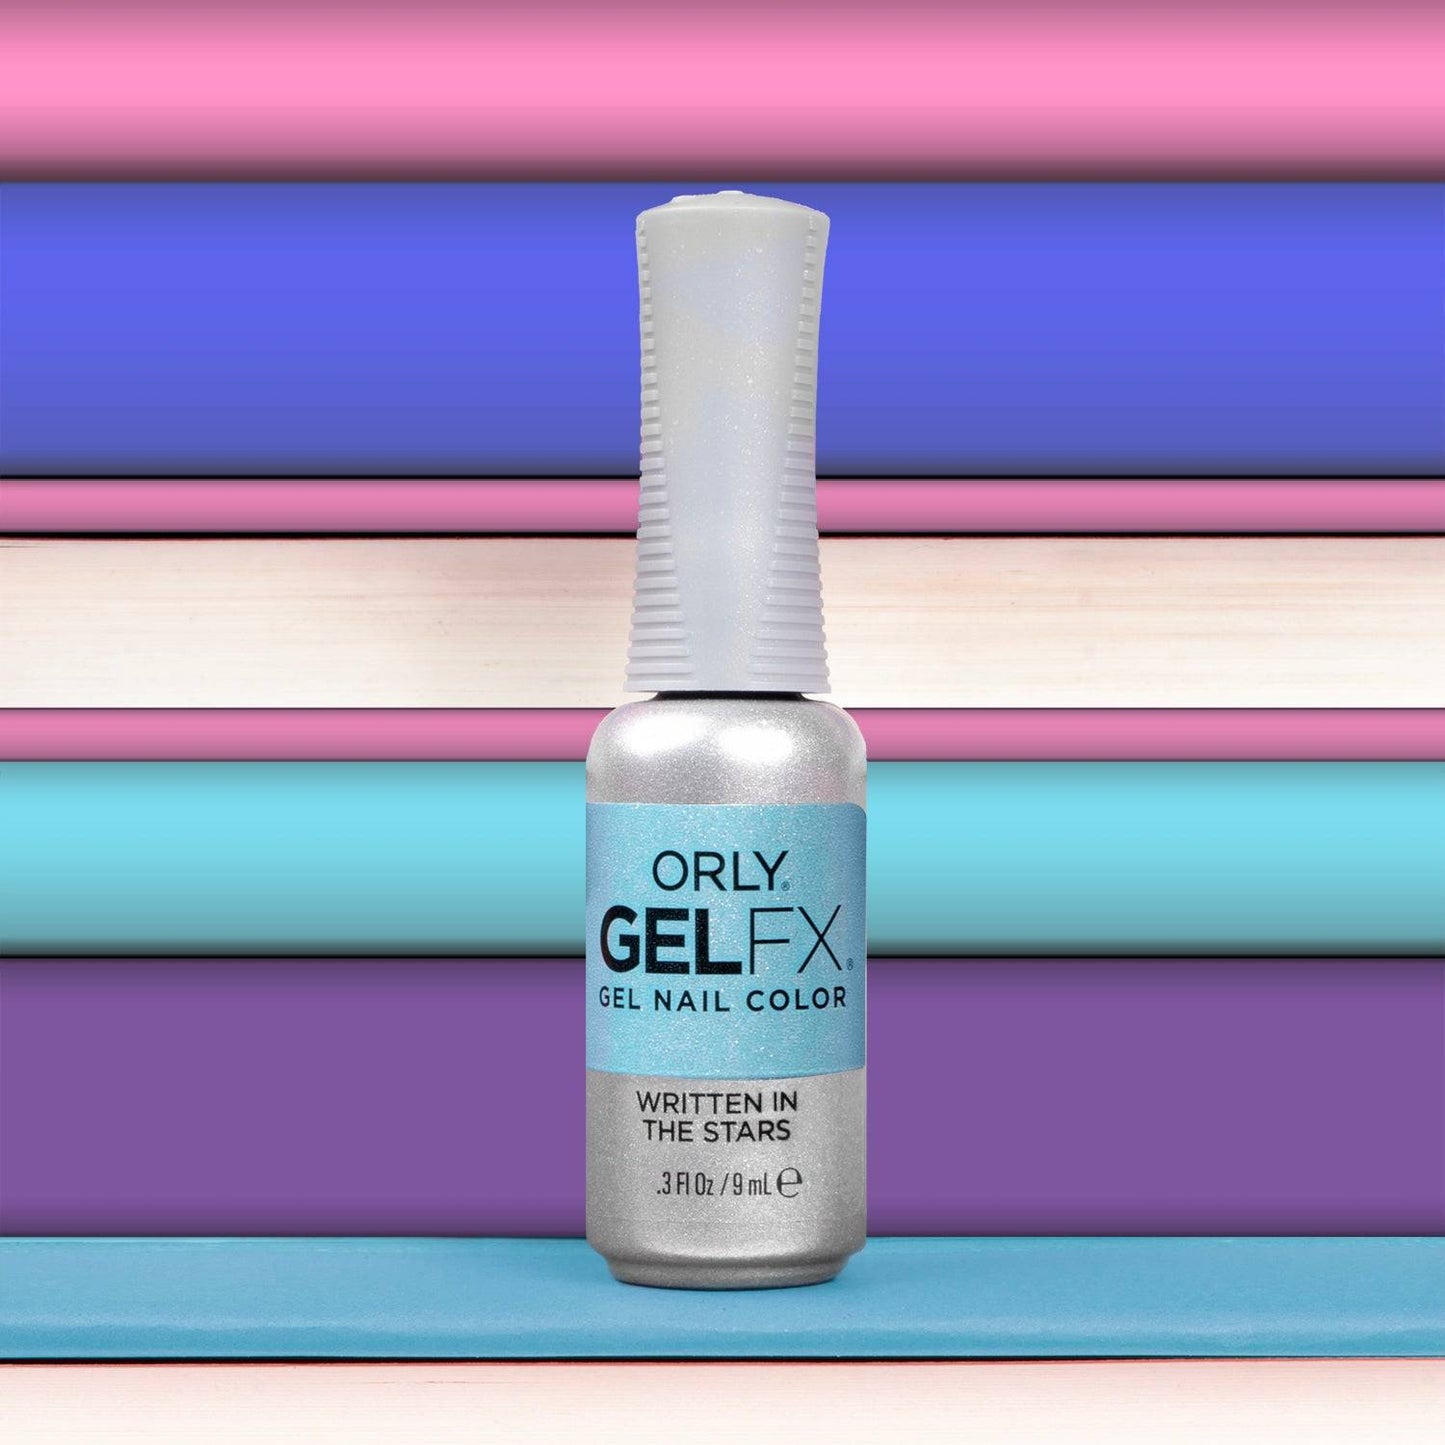 Orly Gel FX - Written in the Stars - Universal Nail Supplies